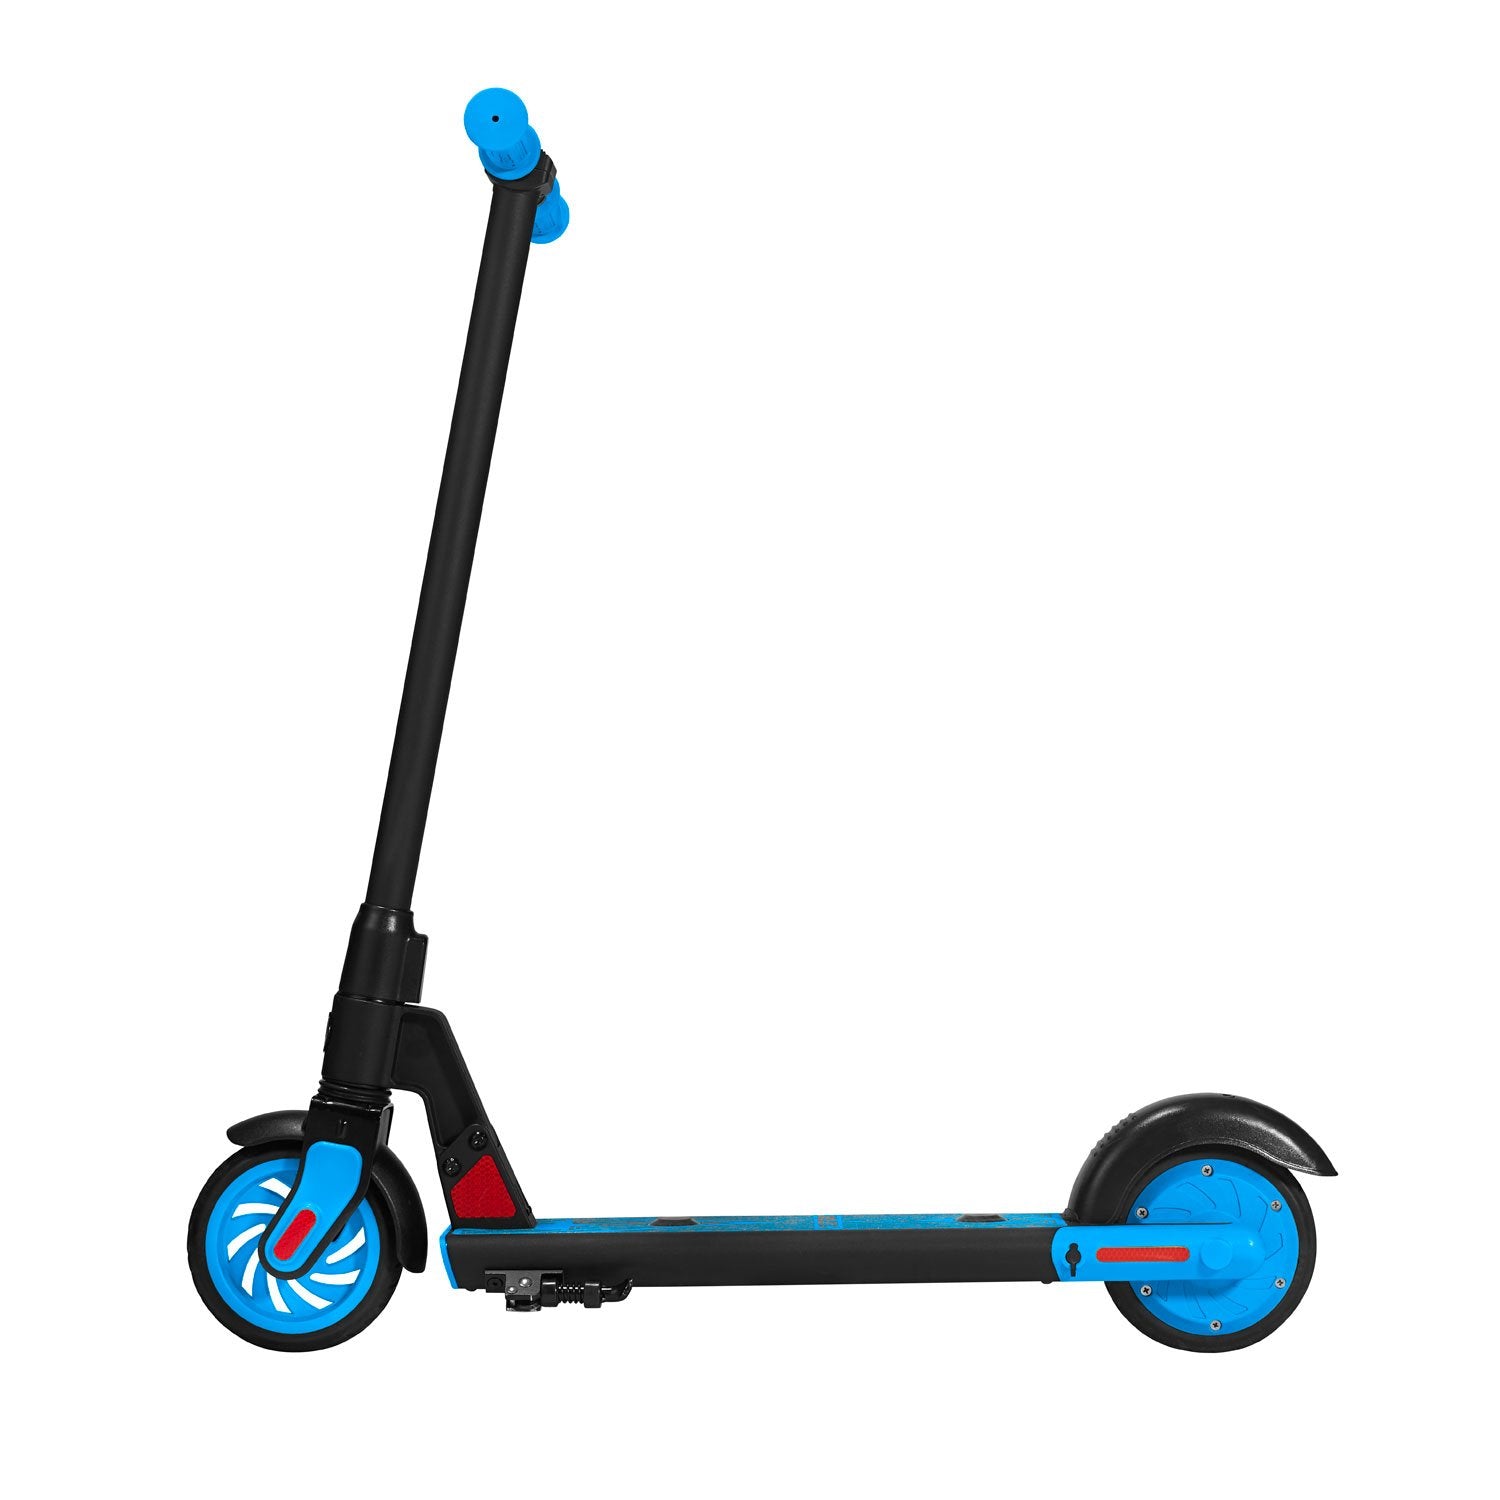 Blue gks electric scooter for kids side image